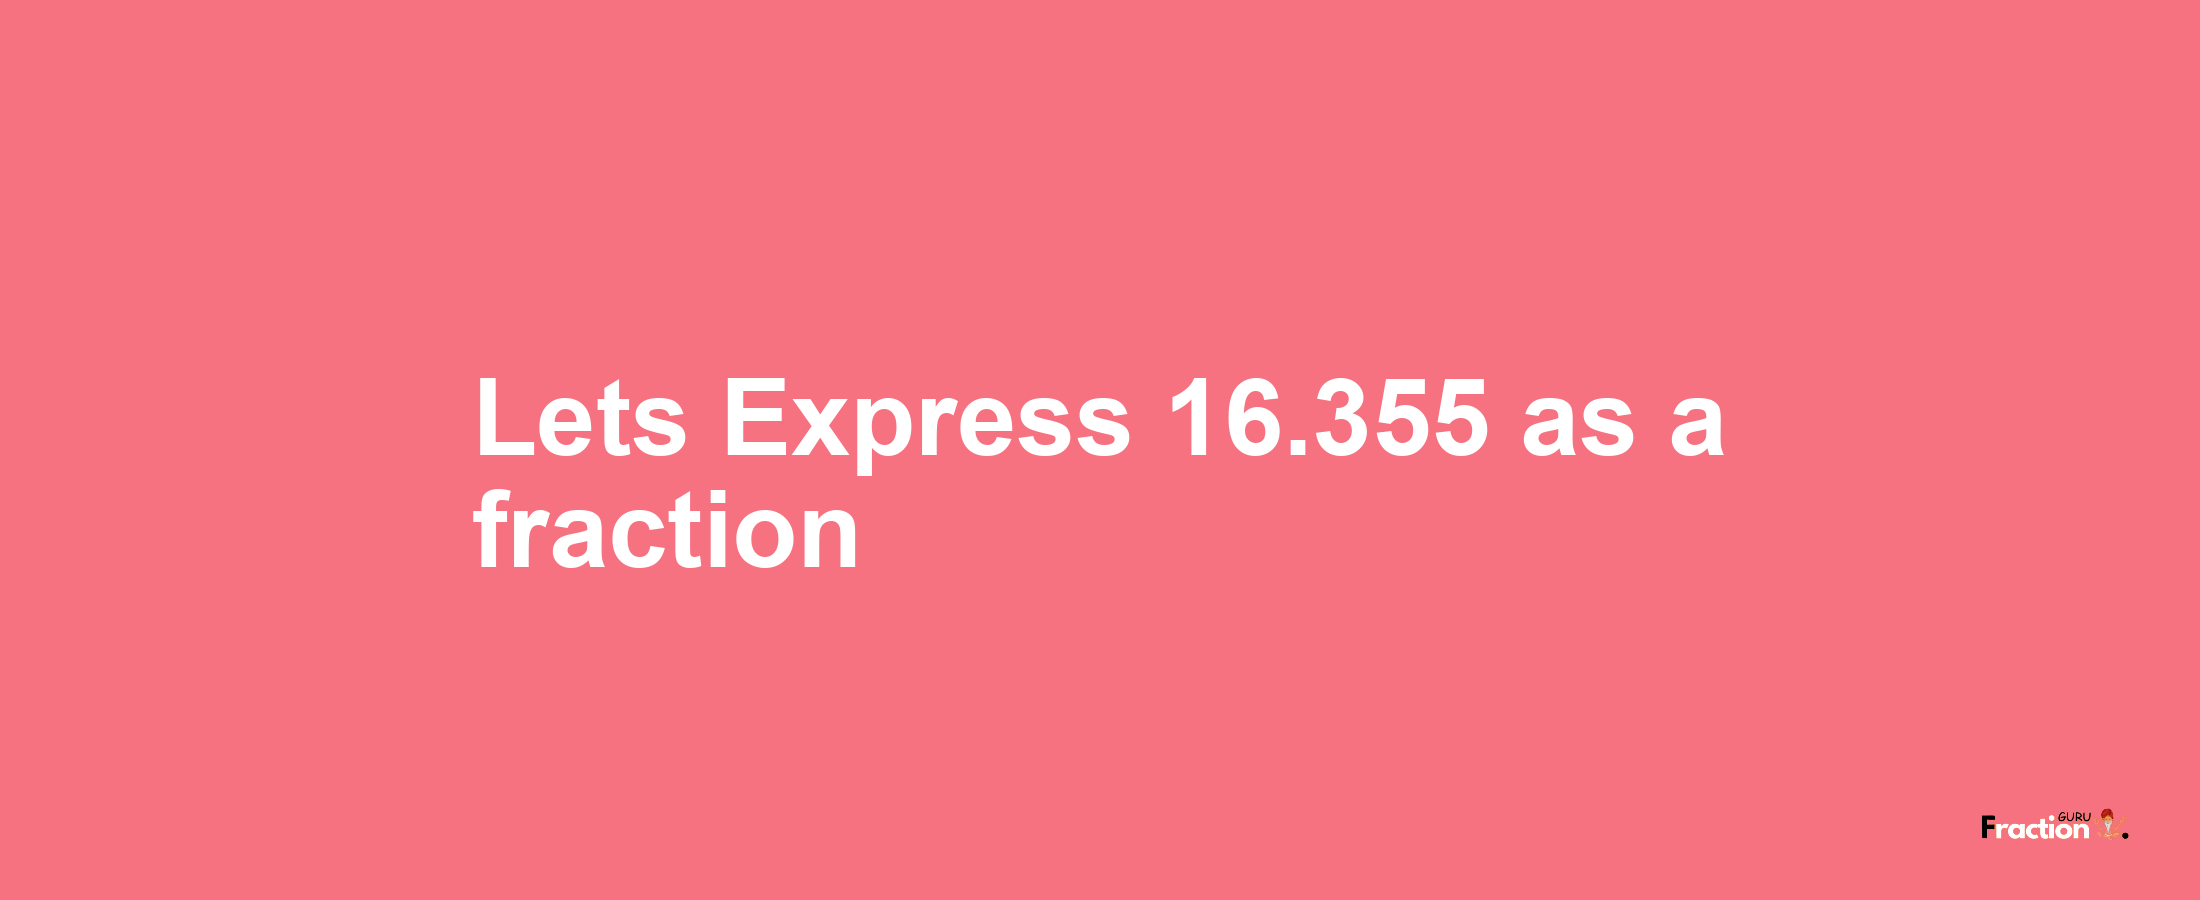 Lets Express 16.355 as afraction